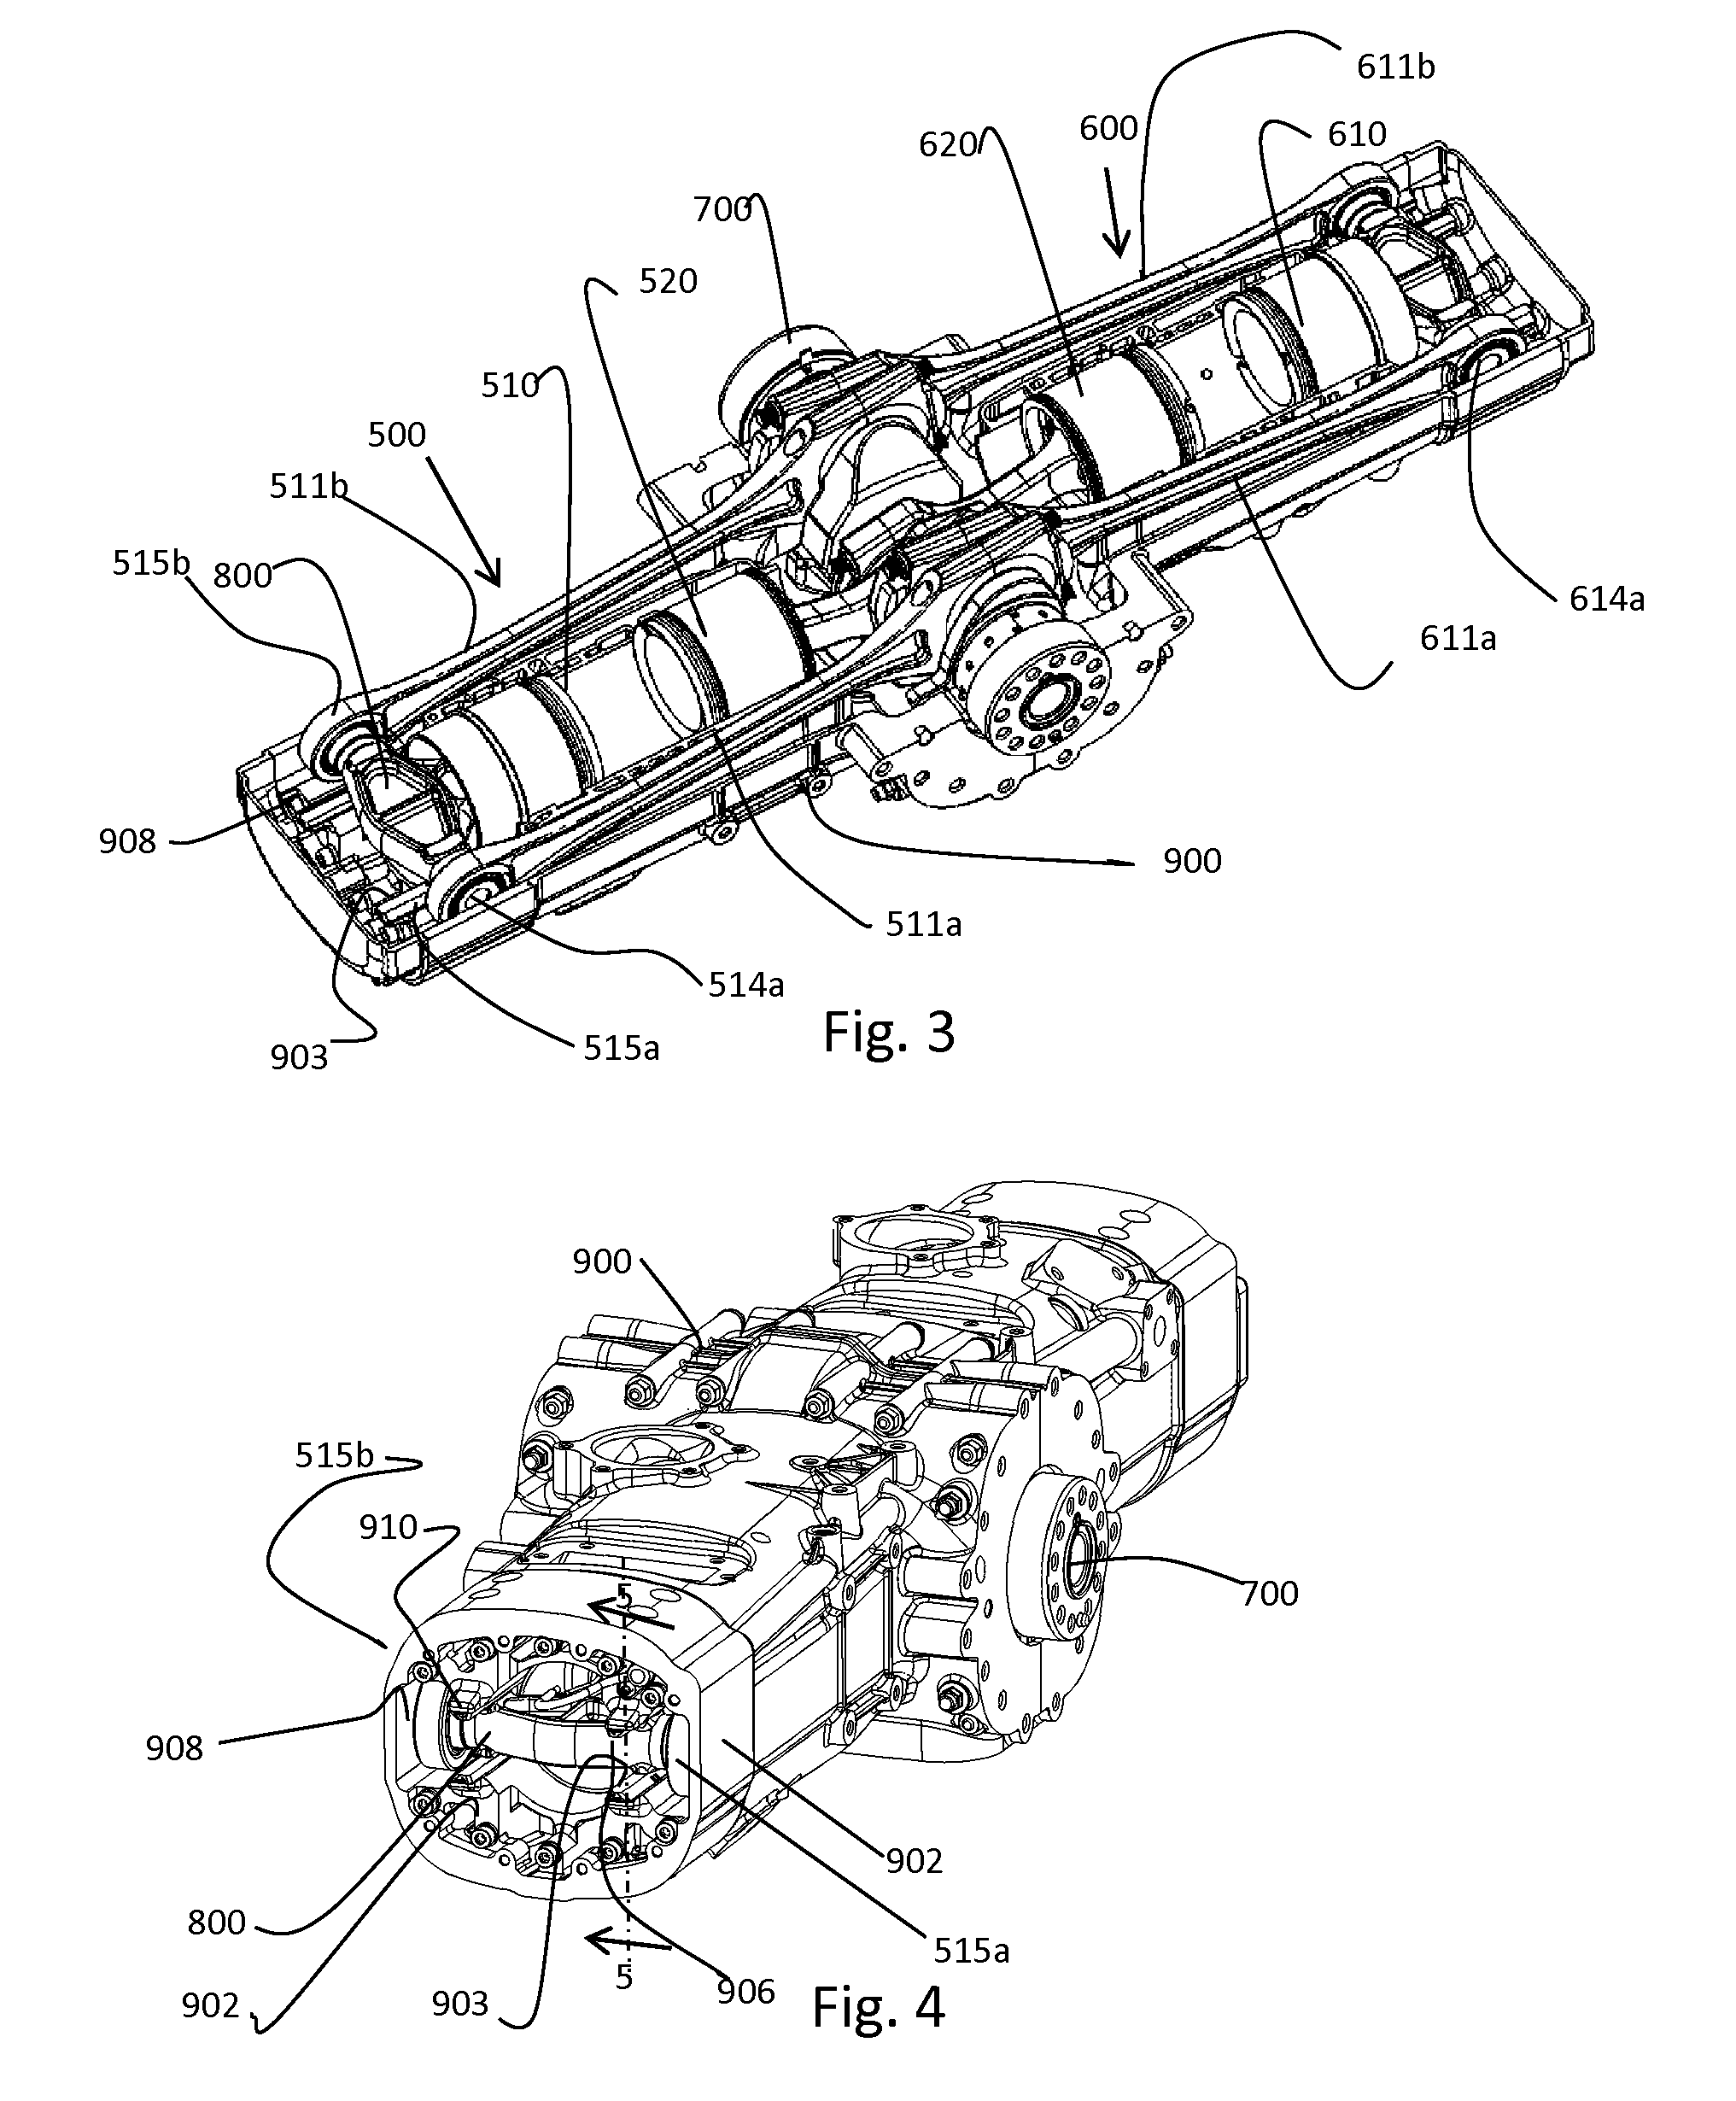 Guided bridge for a piston in an internal combustion engine